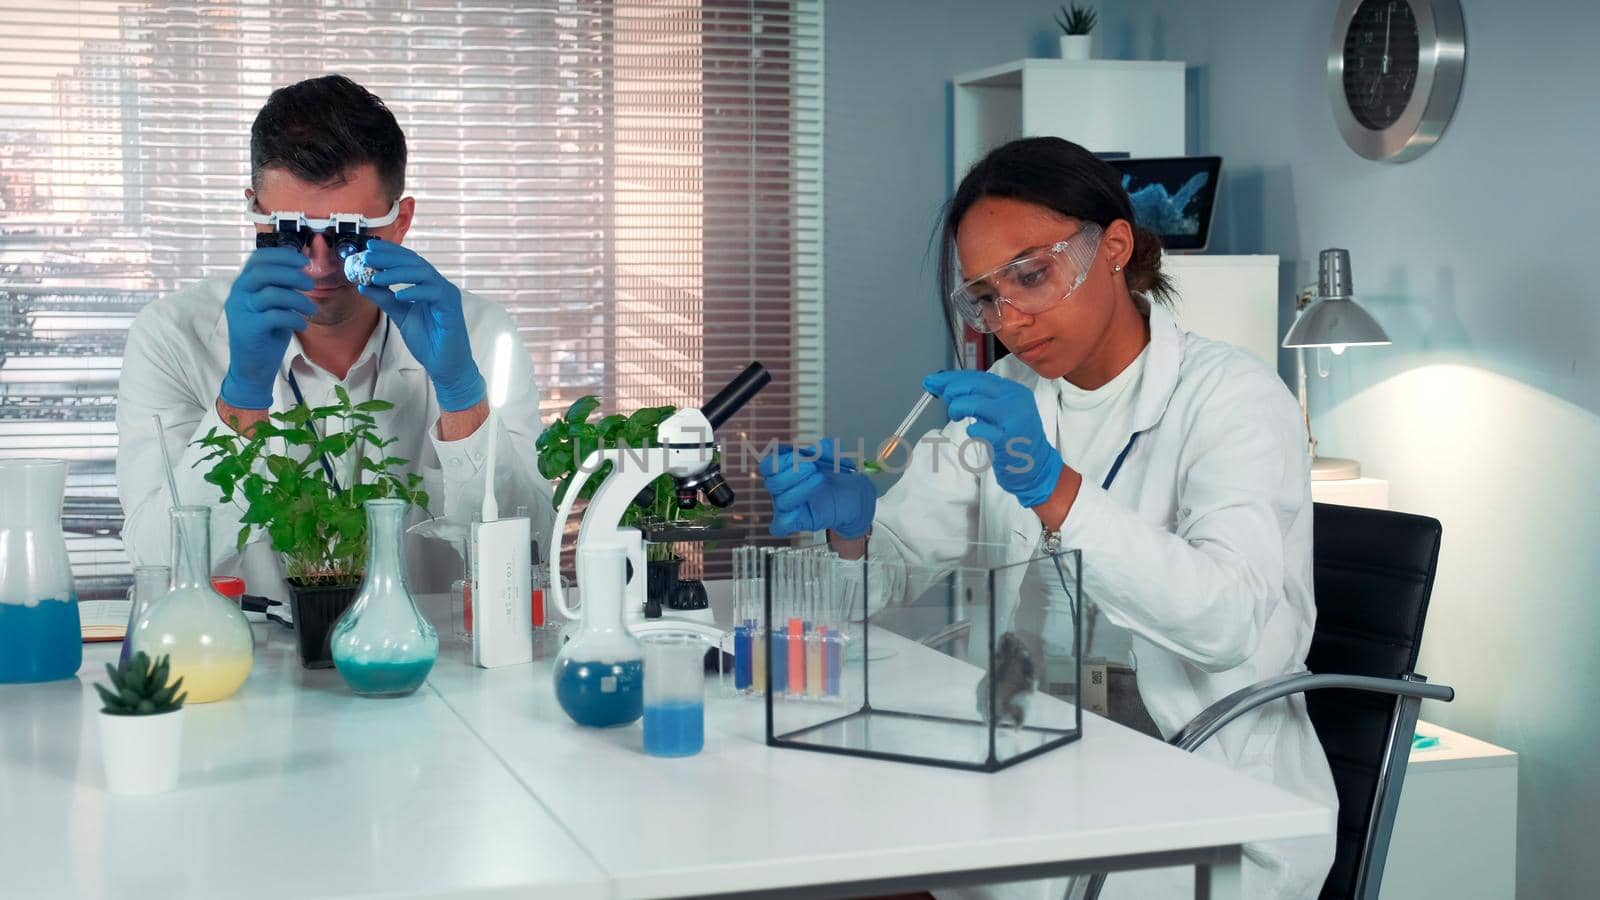 Black research scientist dropping chemical liquid on plant leaf and then giving it to the hamster. She is surprised with the course of the experiment in chemistry lab.